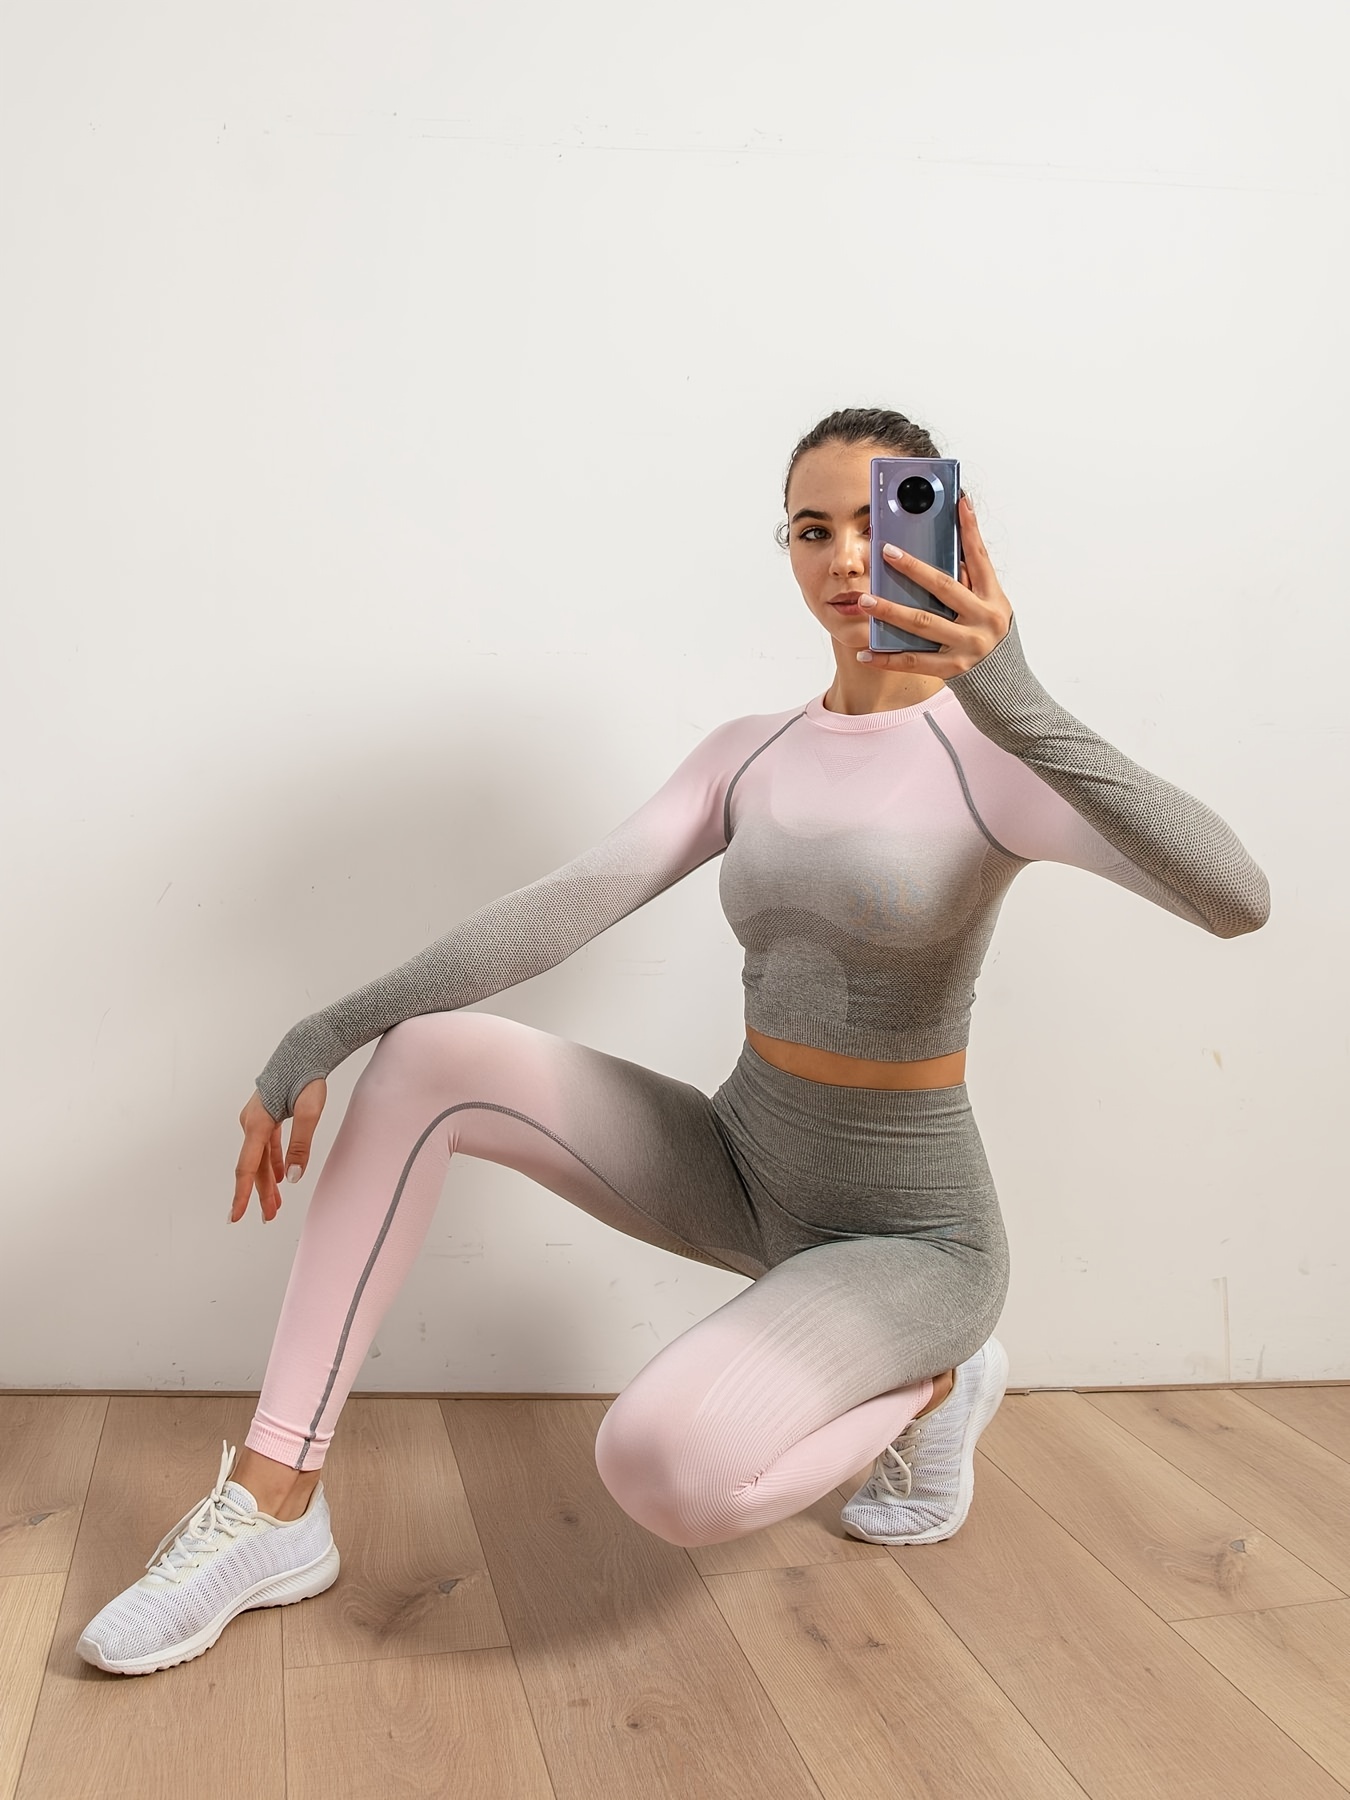 2 pieces Women's Yoga Set - Long Sleeve Sports Top and Tight Shorts for  Fitness and Workout Gym - Comfortable and Stylish Activewear